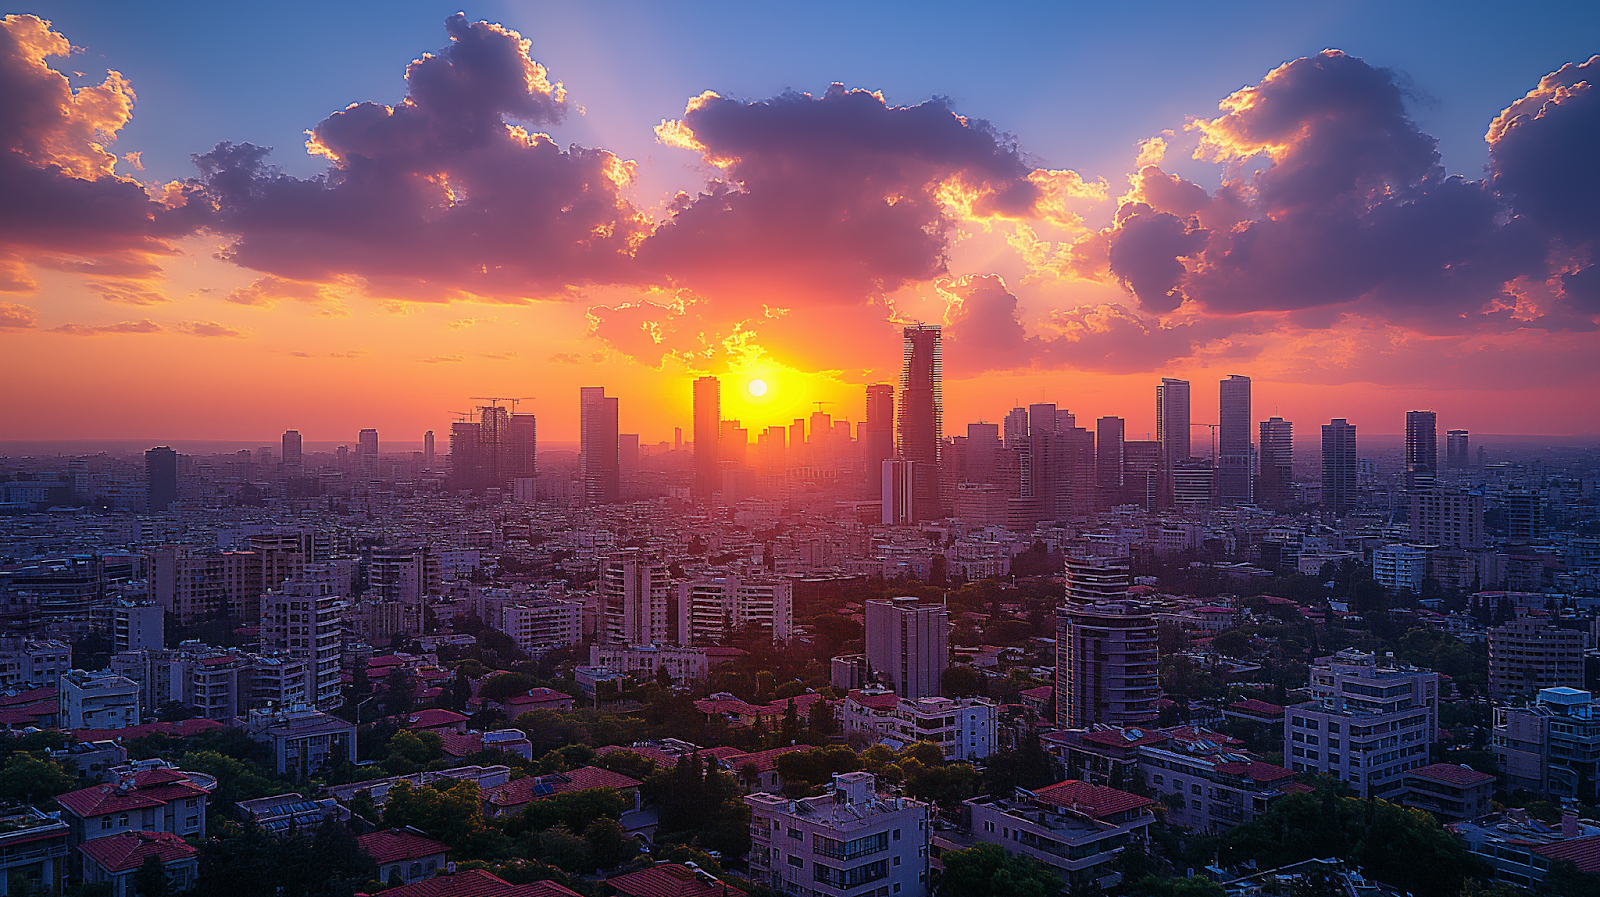 Sunset over Tel Aviv, showing a striking contrast between the historic buildings of Jaffa and the city's modern skyscrapers, under a vibrant orange sky.